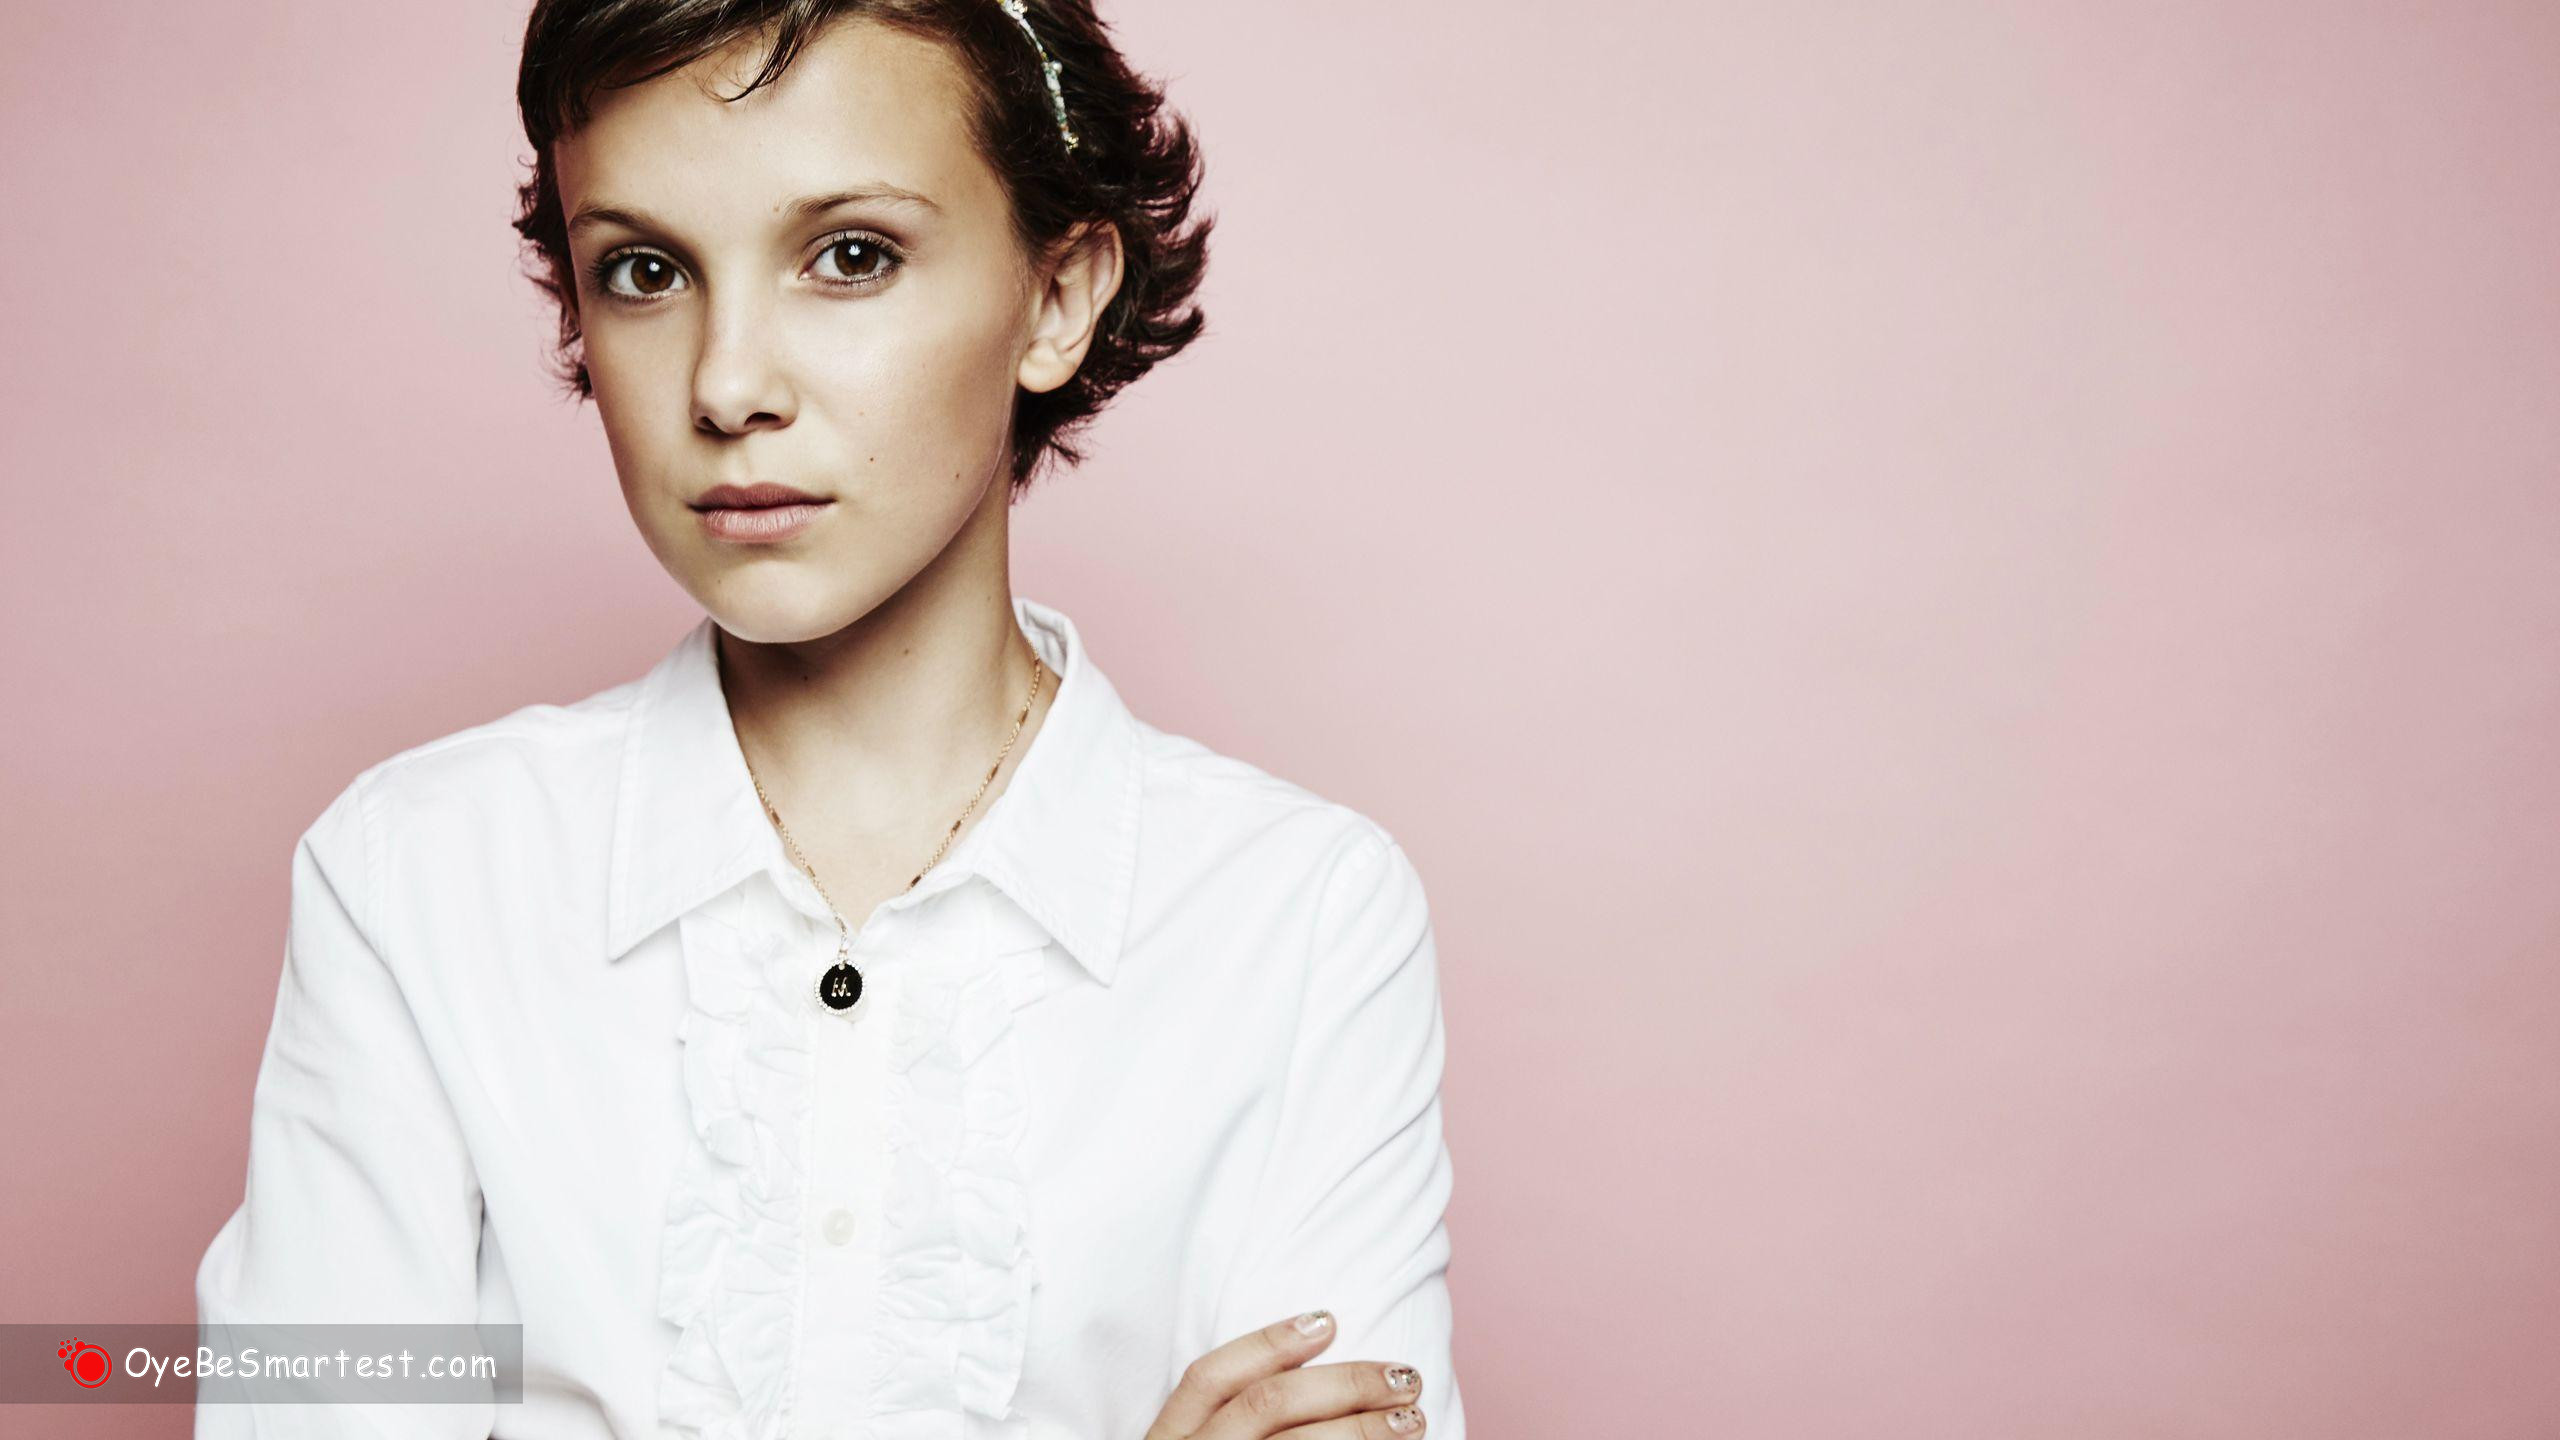 Millie Bobby Brown HD Wallpapers